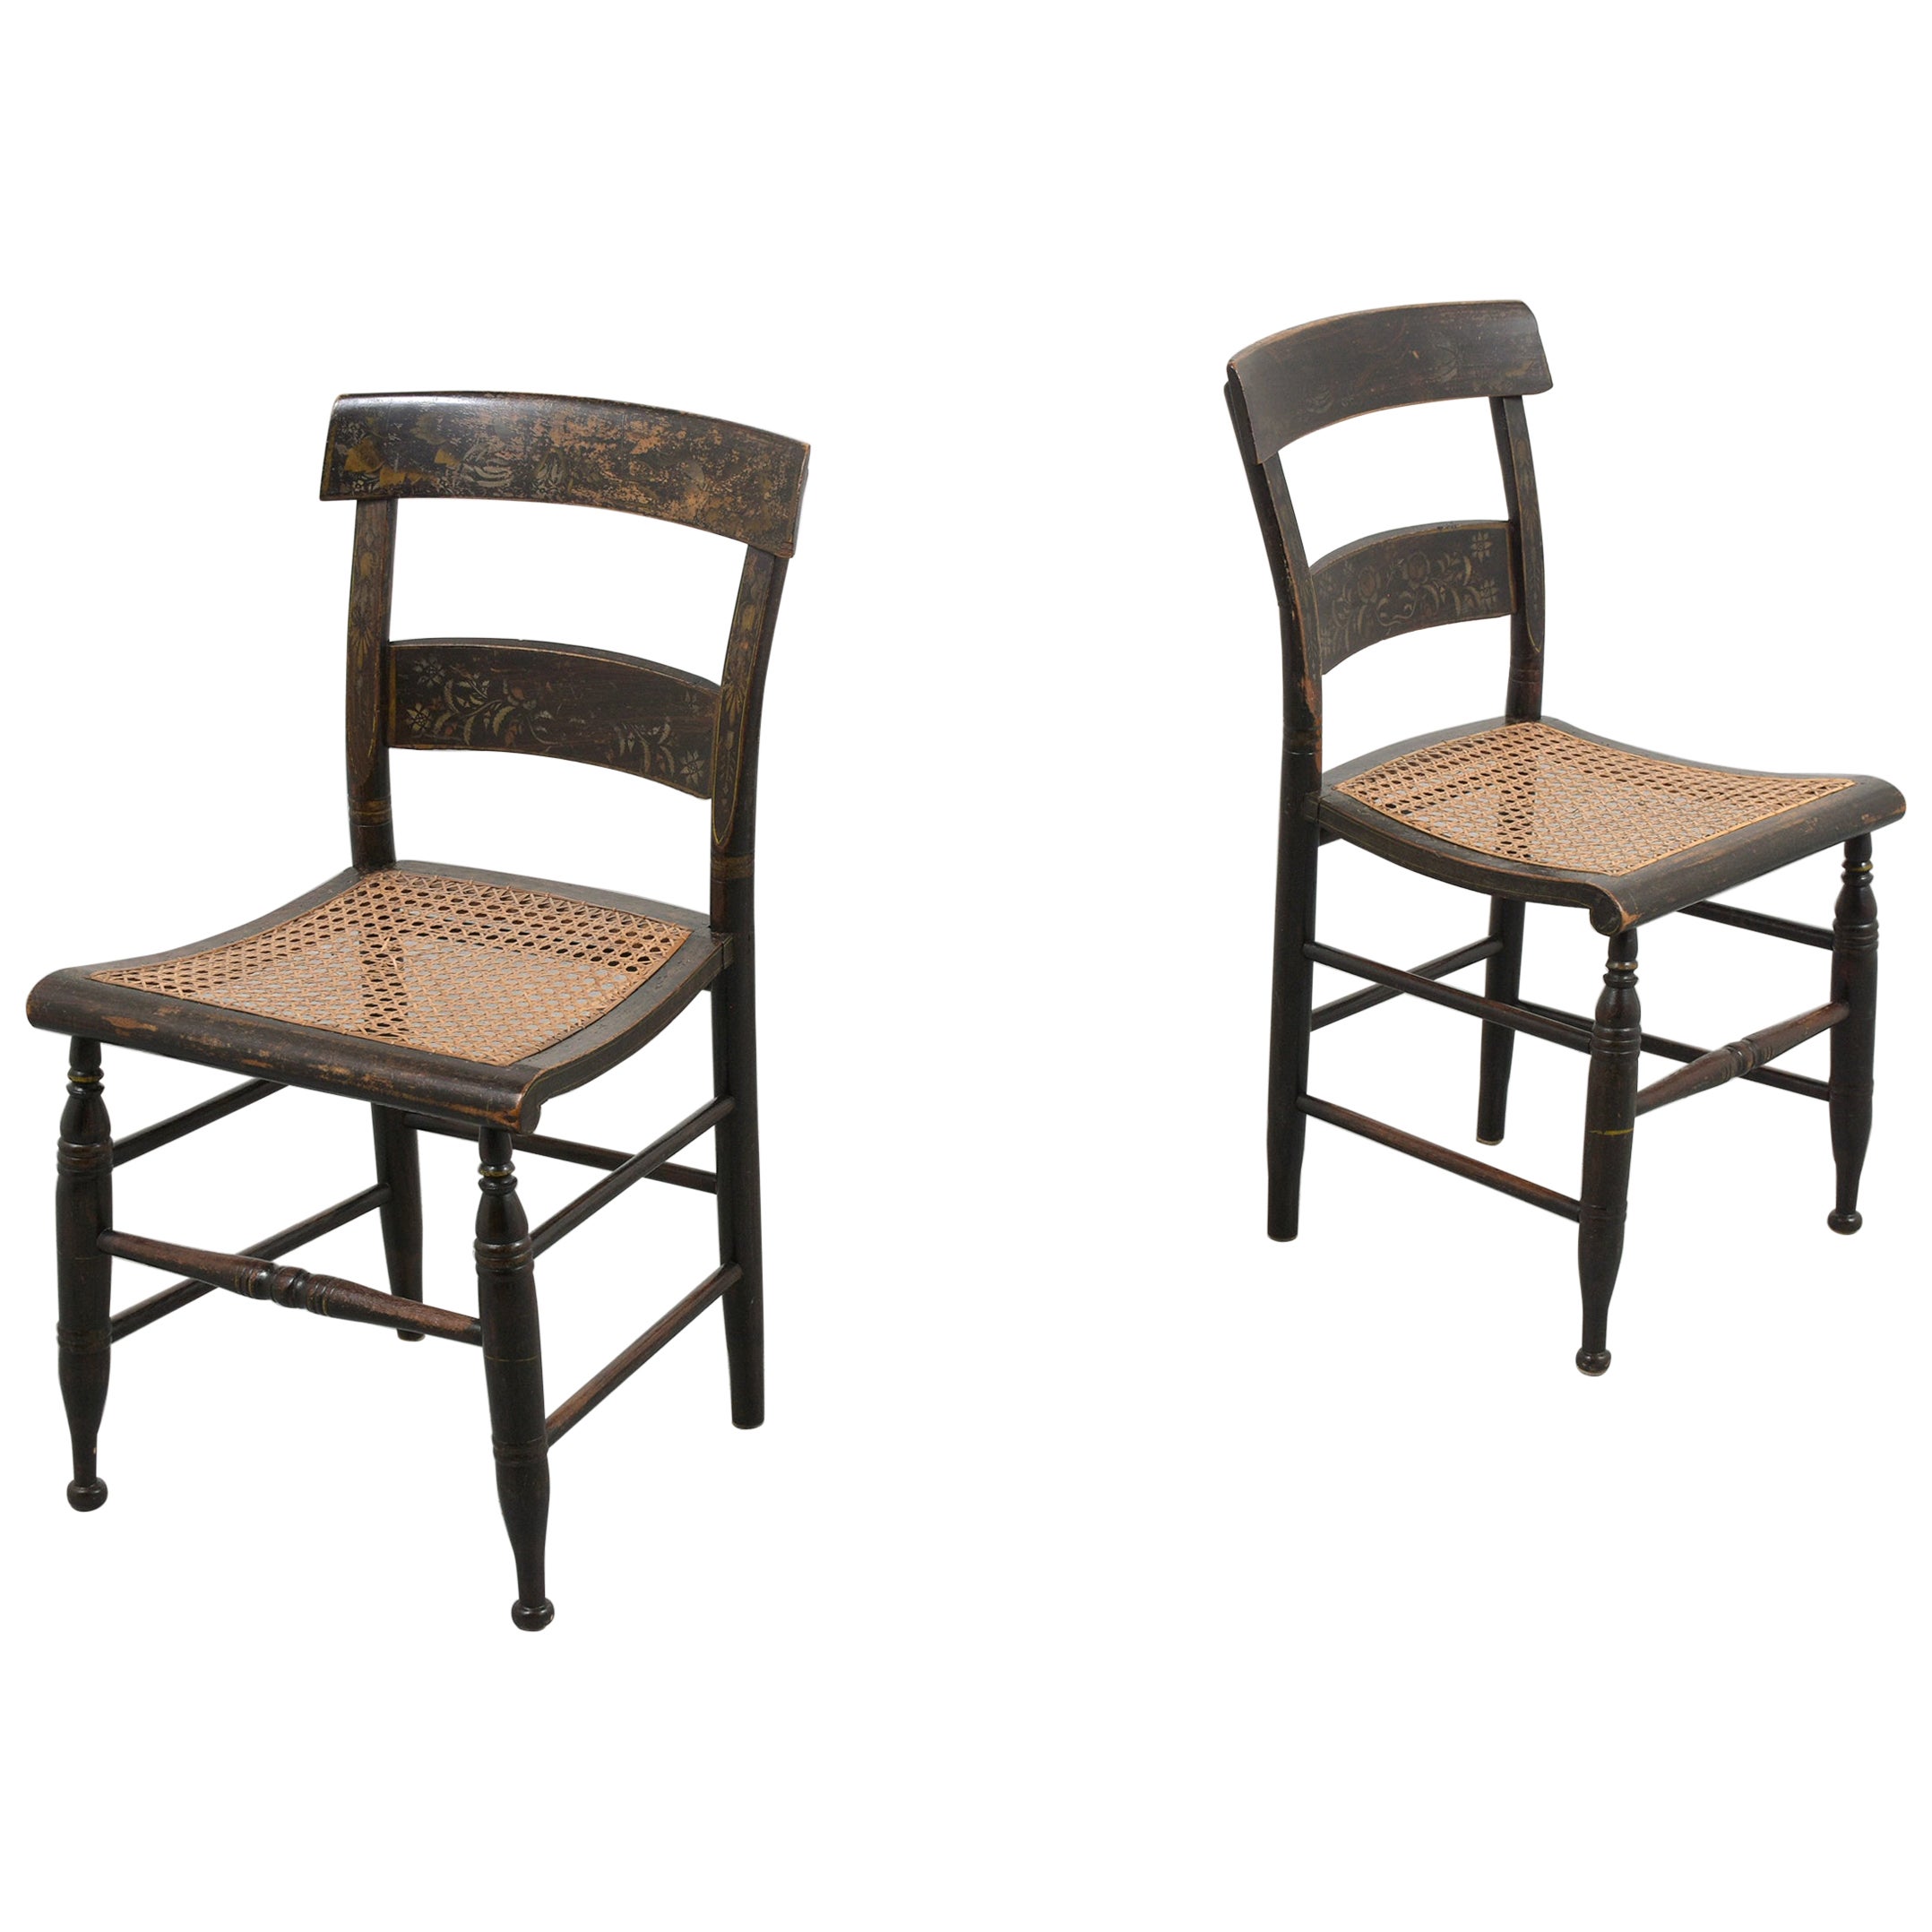 Two Antique Cane Chairs